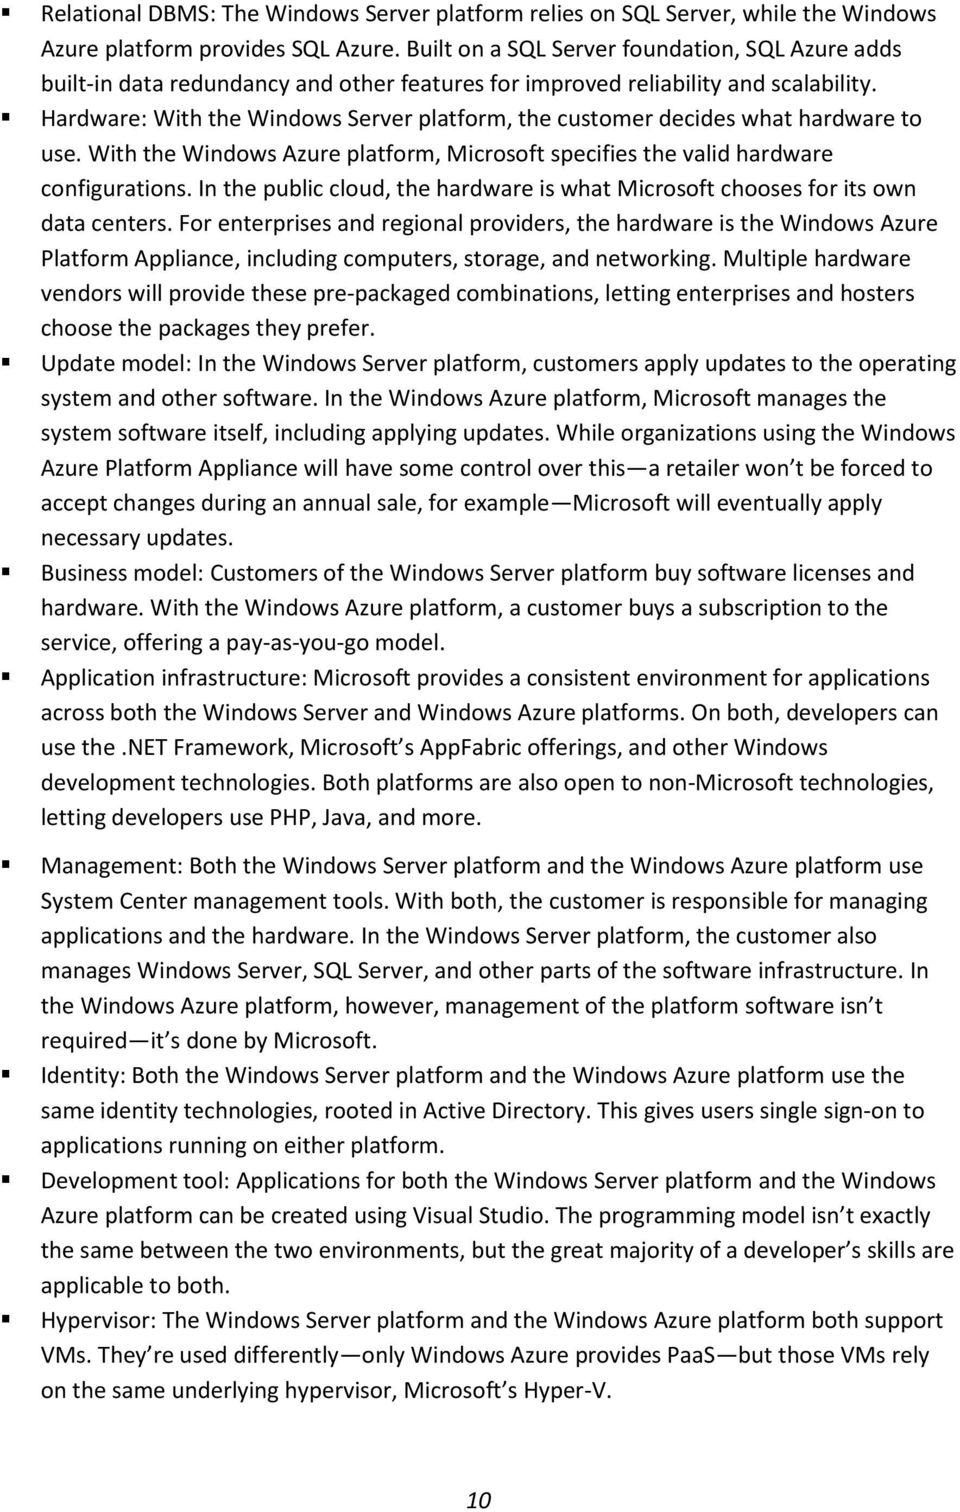 Hardware: With the Windows Server platform, the customer decides what hardware to use. With the Windows Azure platform, Microsoft specifies the valid hardware configurations.